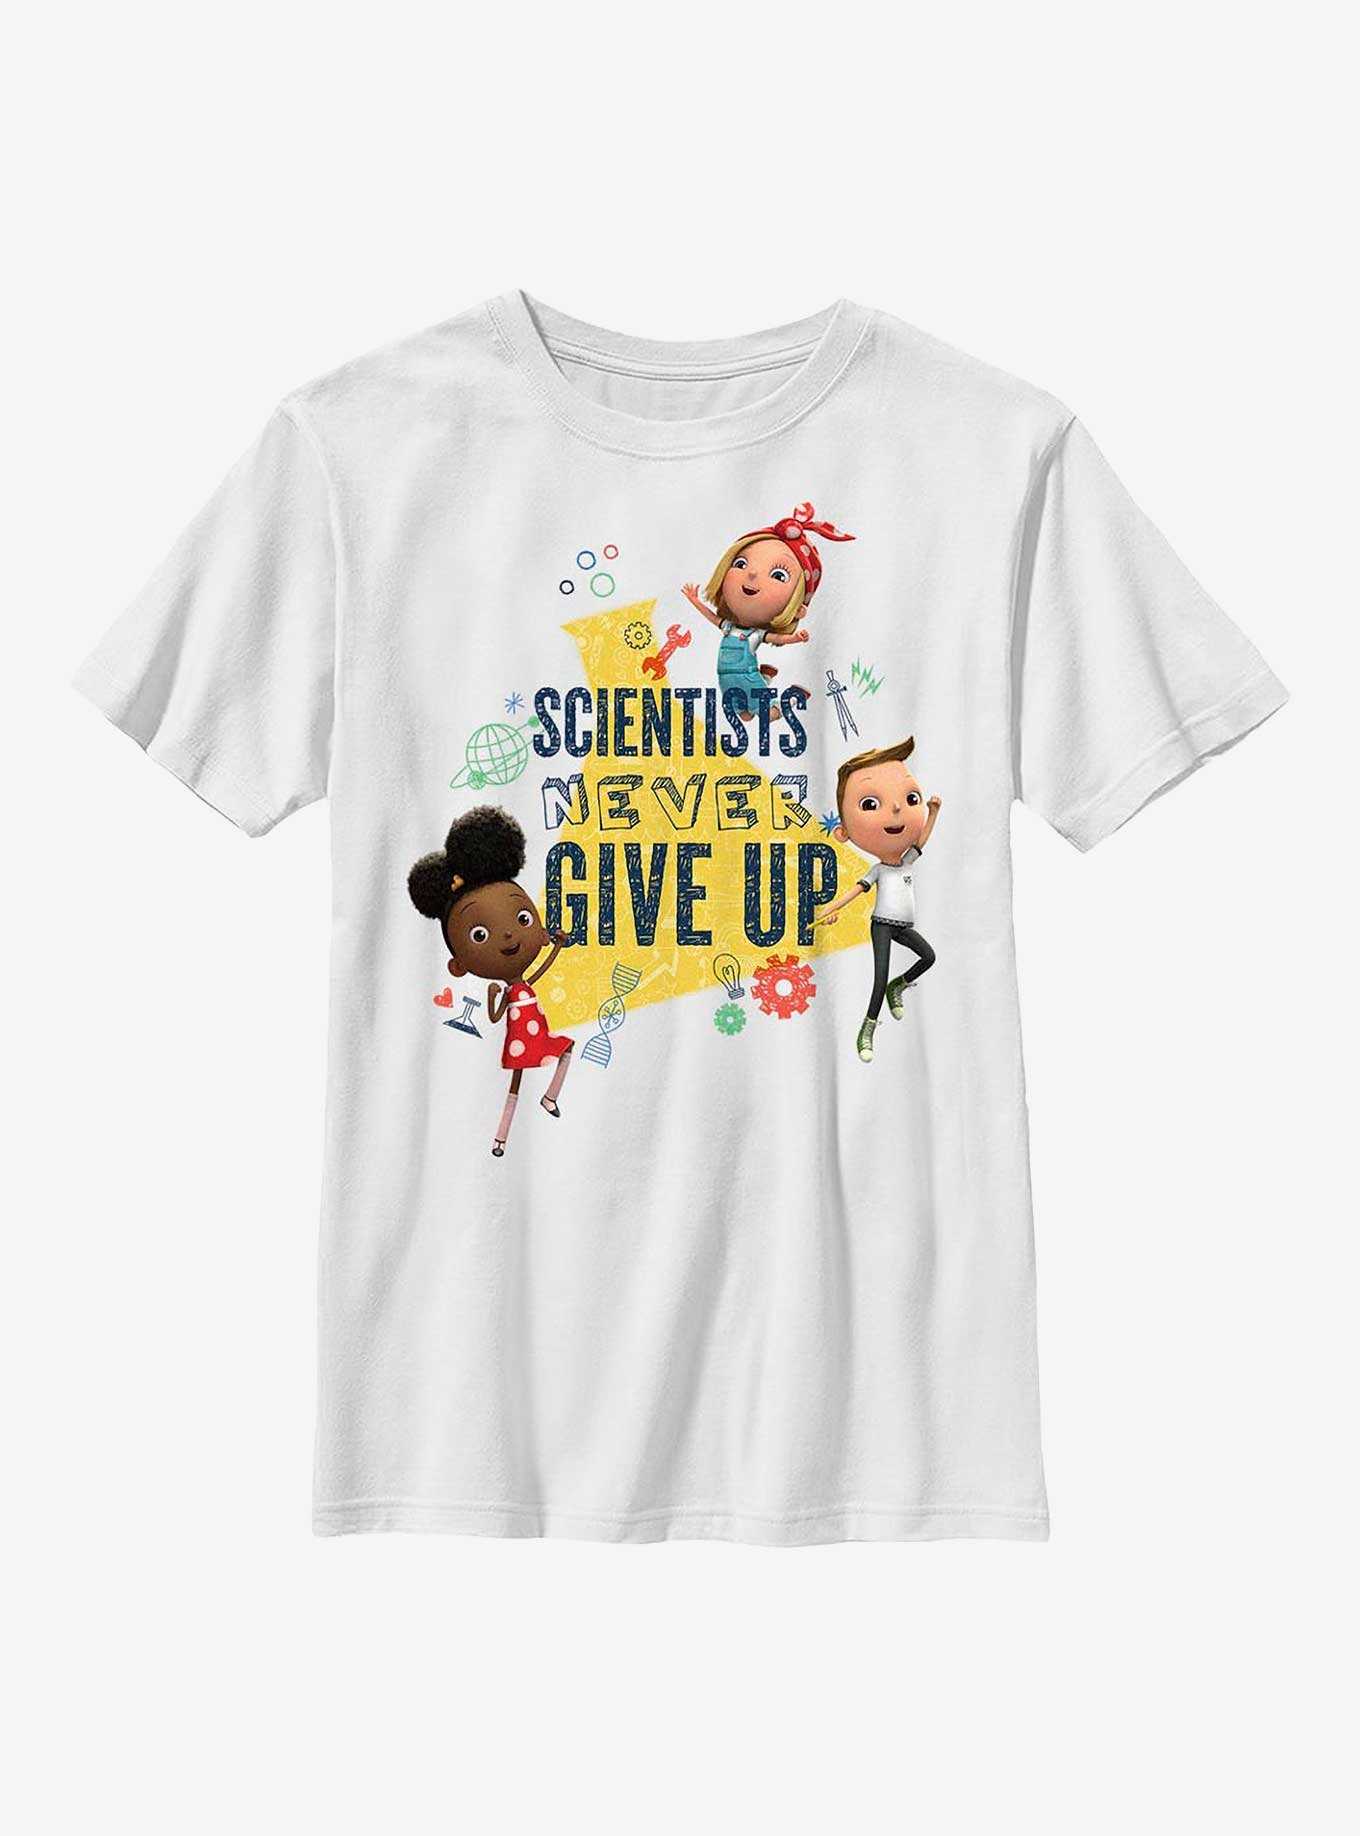 Ada Twist, Scientist Never Give Up Youth T-Shirt, , hi-res